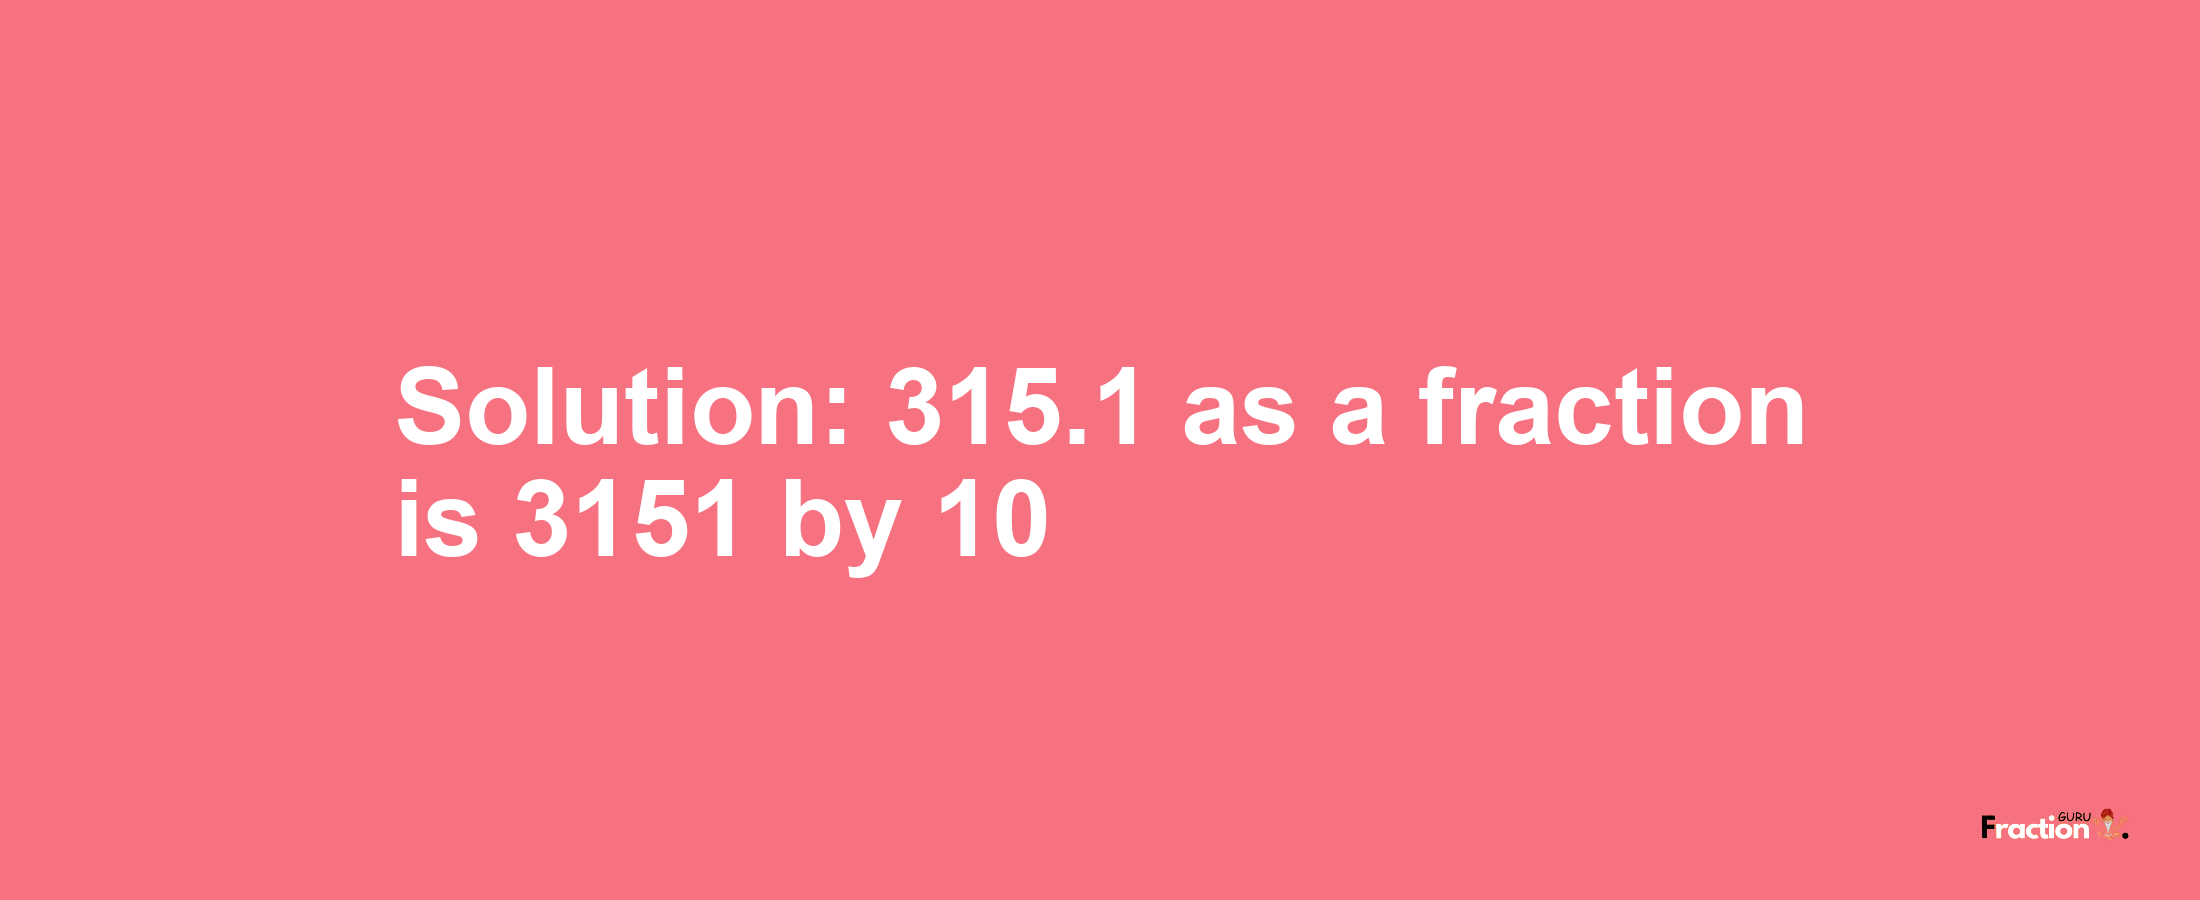 Solution:315.1 as a fraction is 3151/10